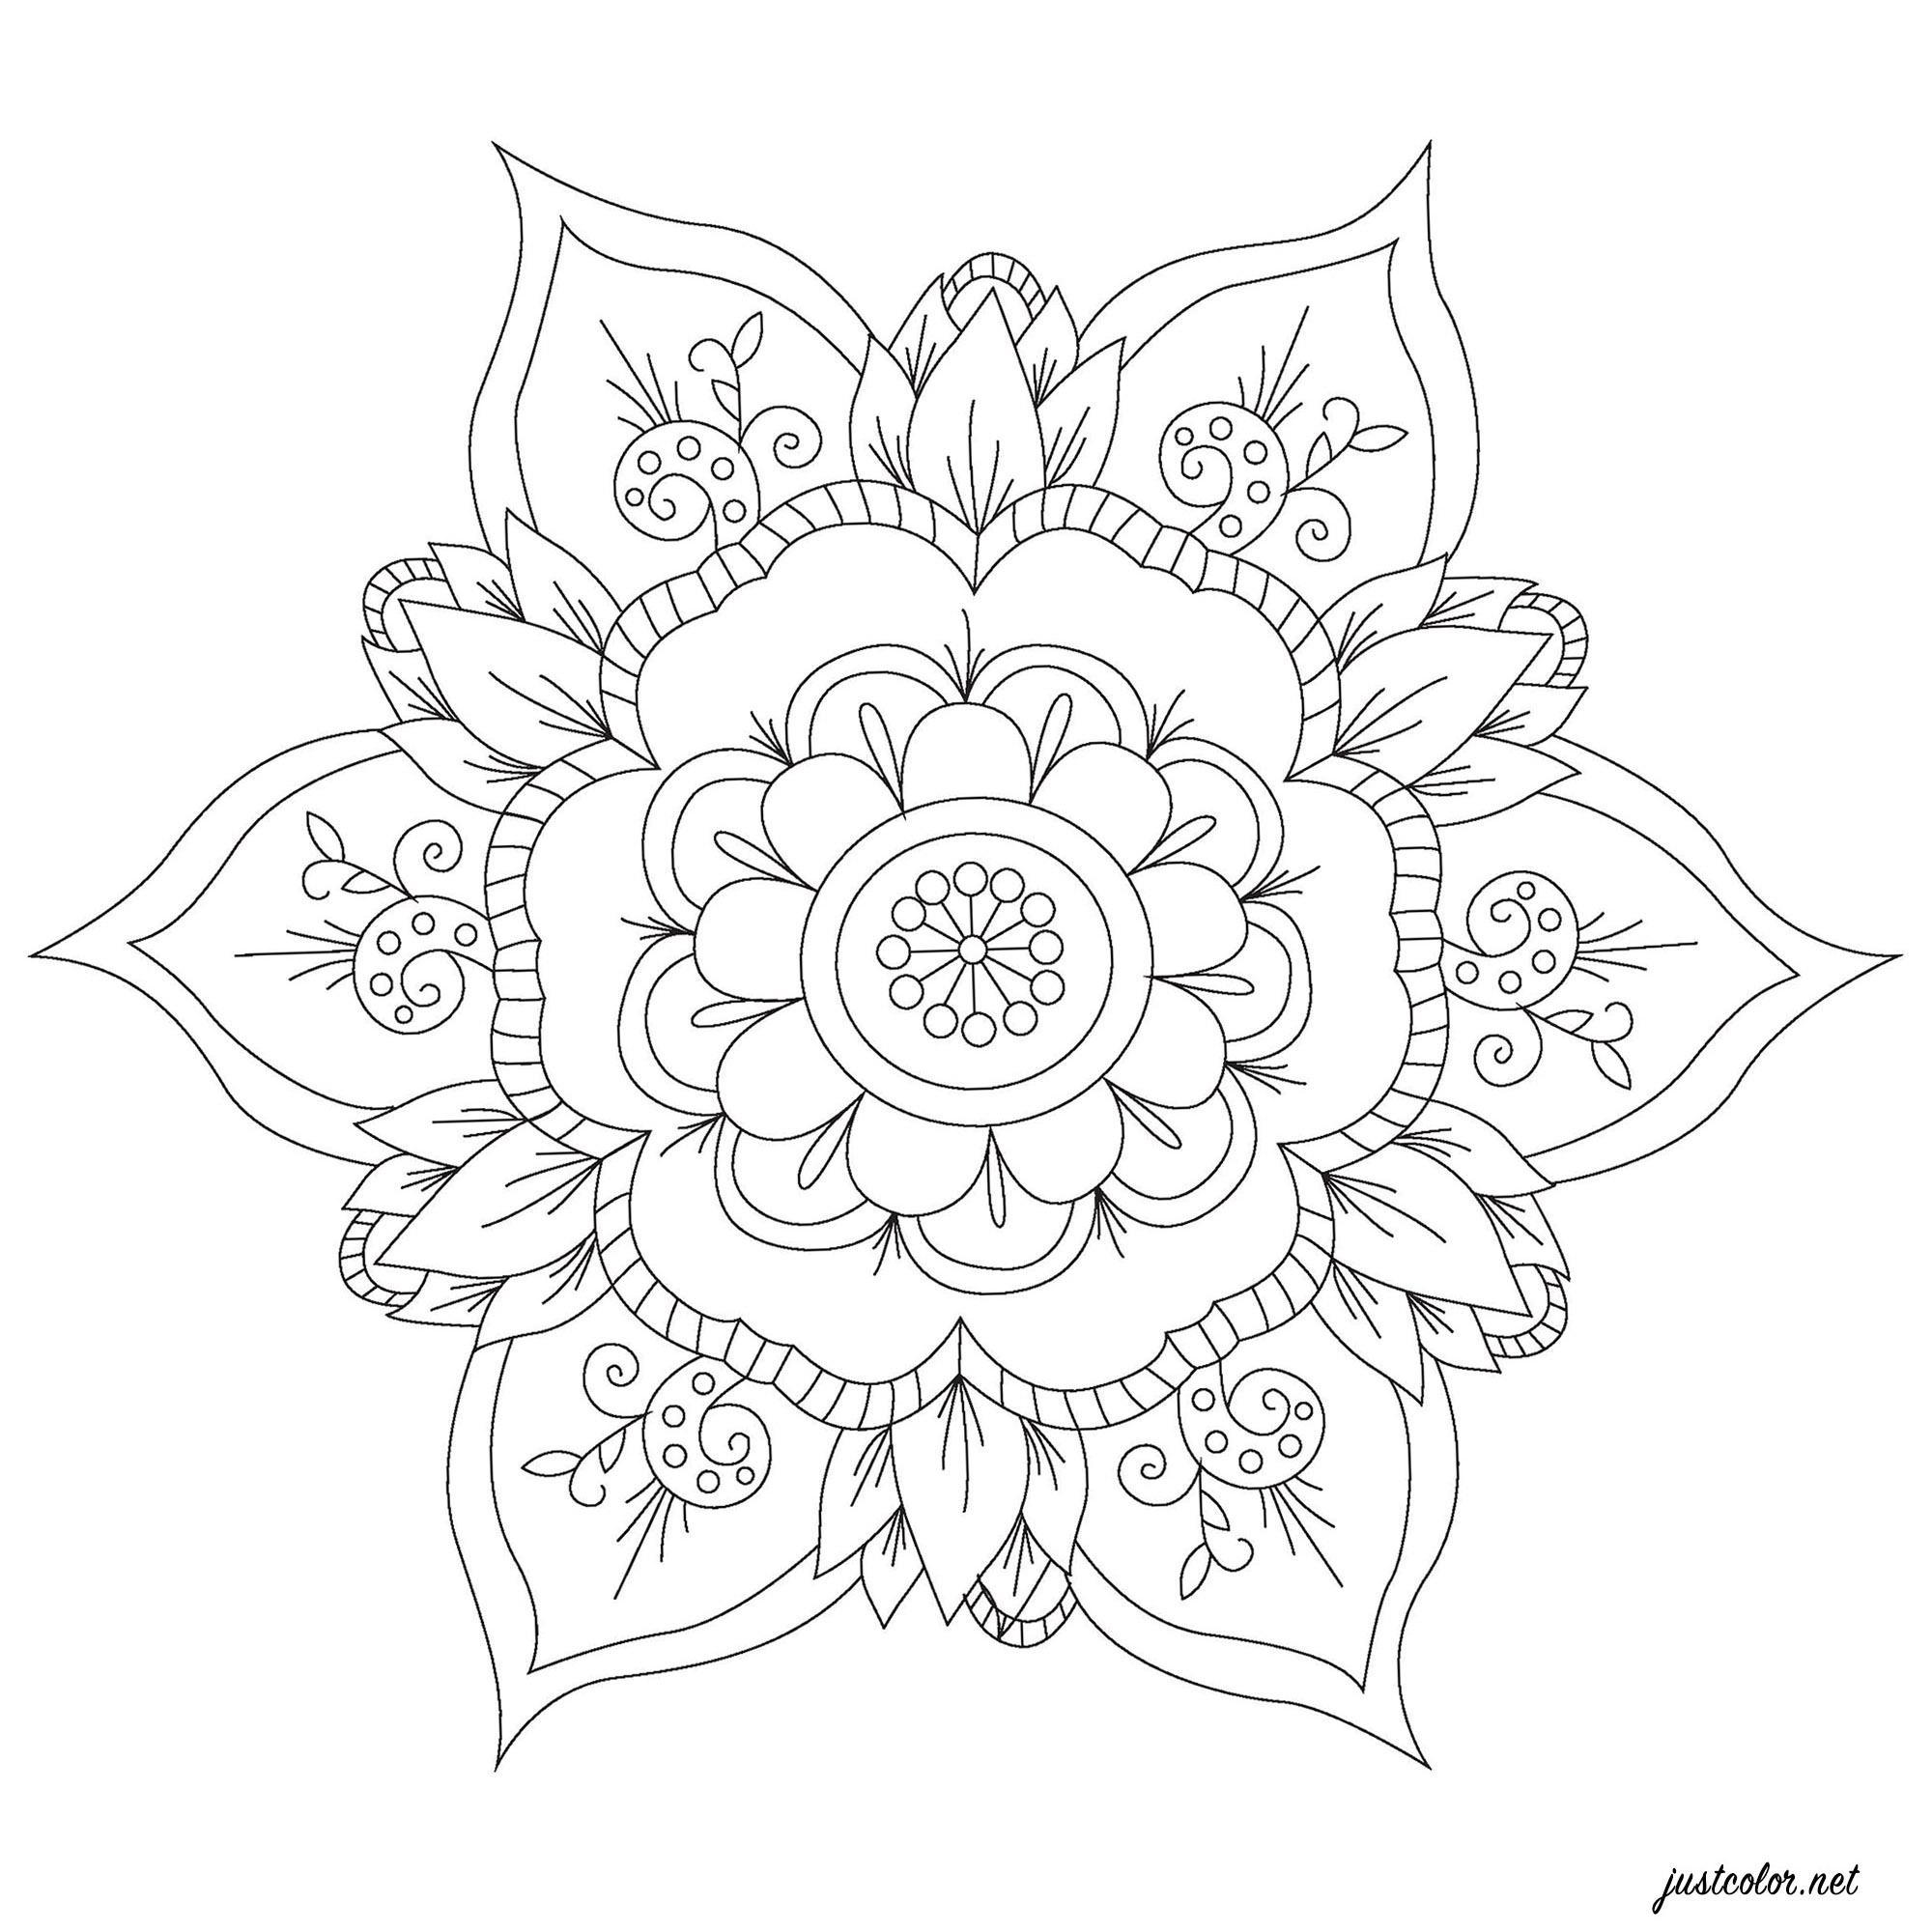 Simple and cute Mandala with harmoniously distributed flowers, petals and leaves, Artist : Pierre C